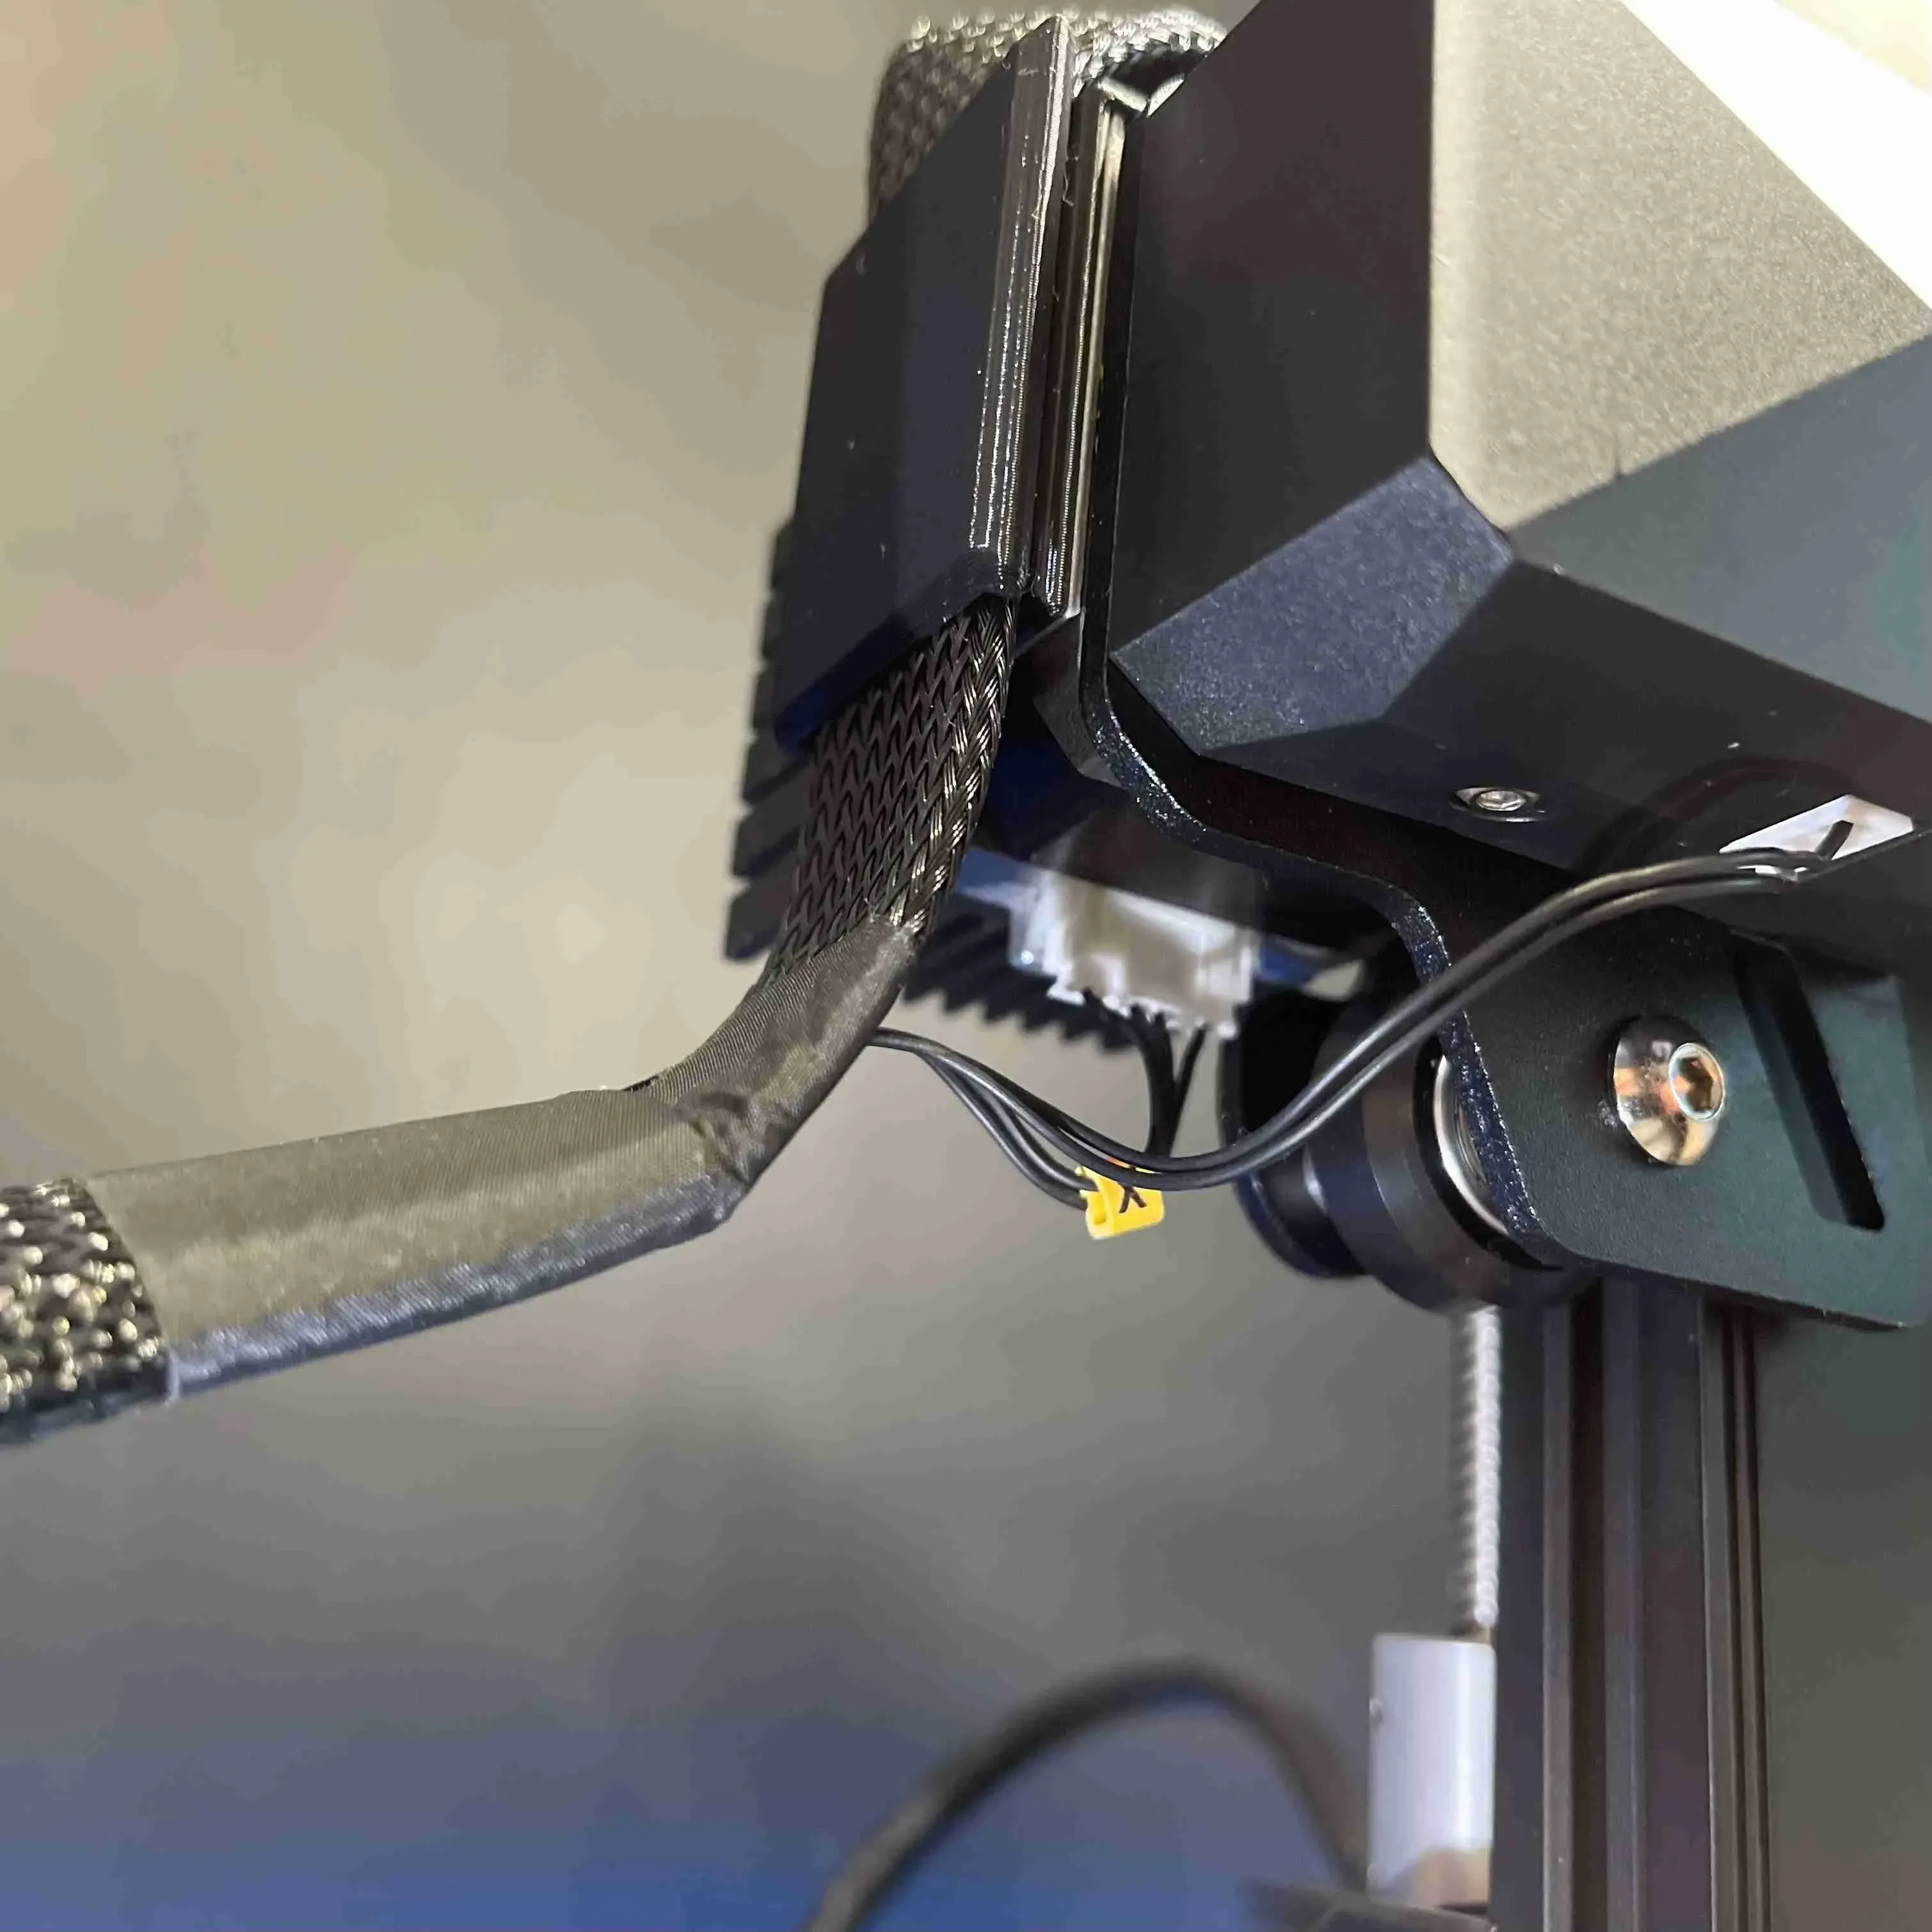 Creality Ender-3 S1 Pro - X-axis motor cable clamp